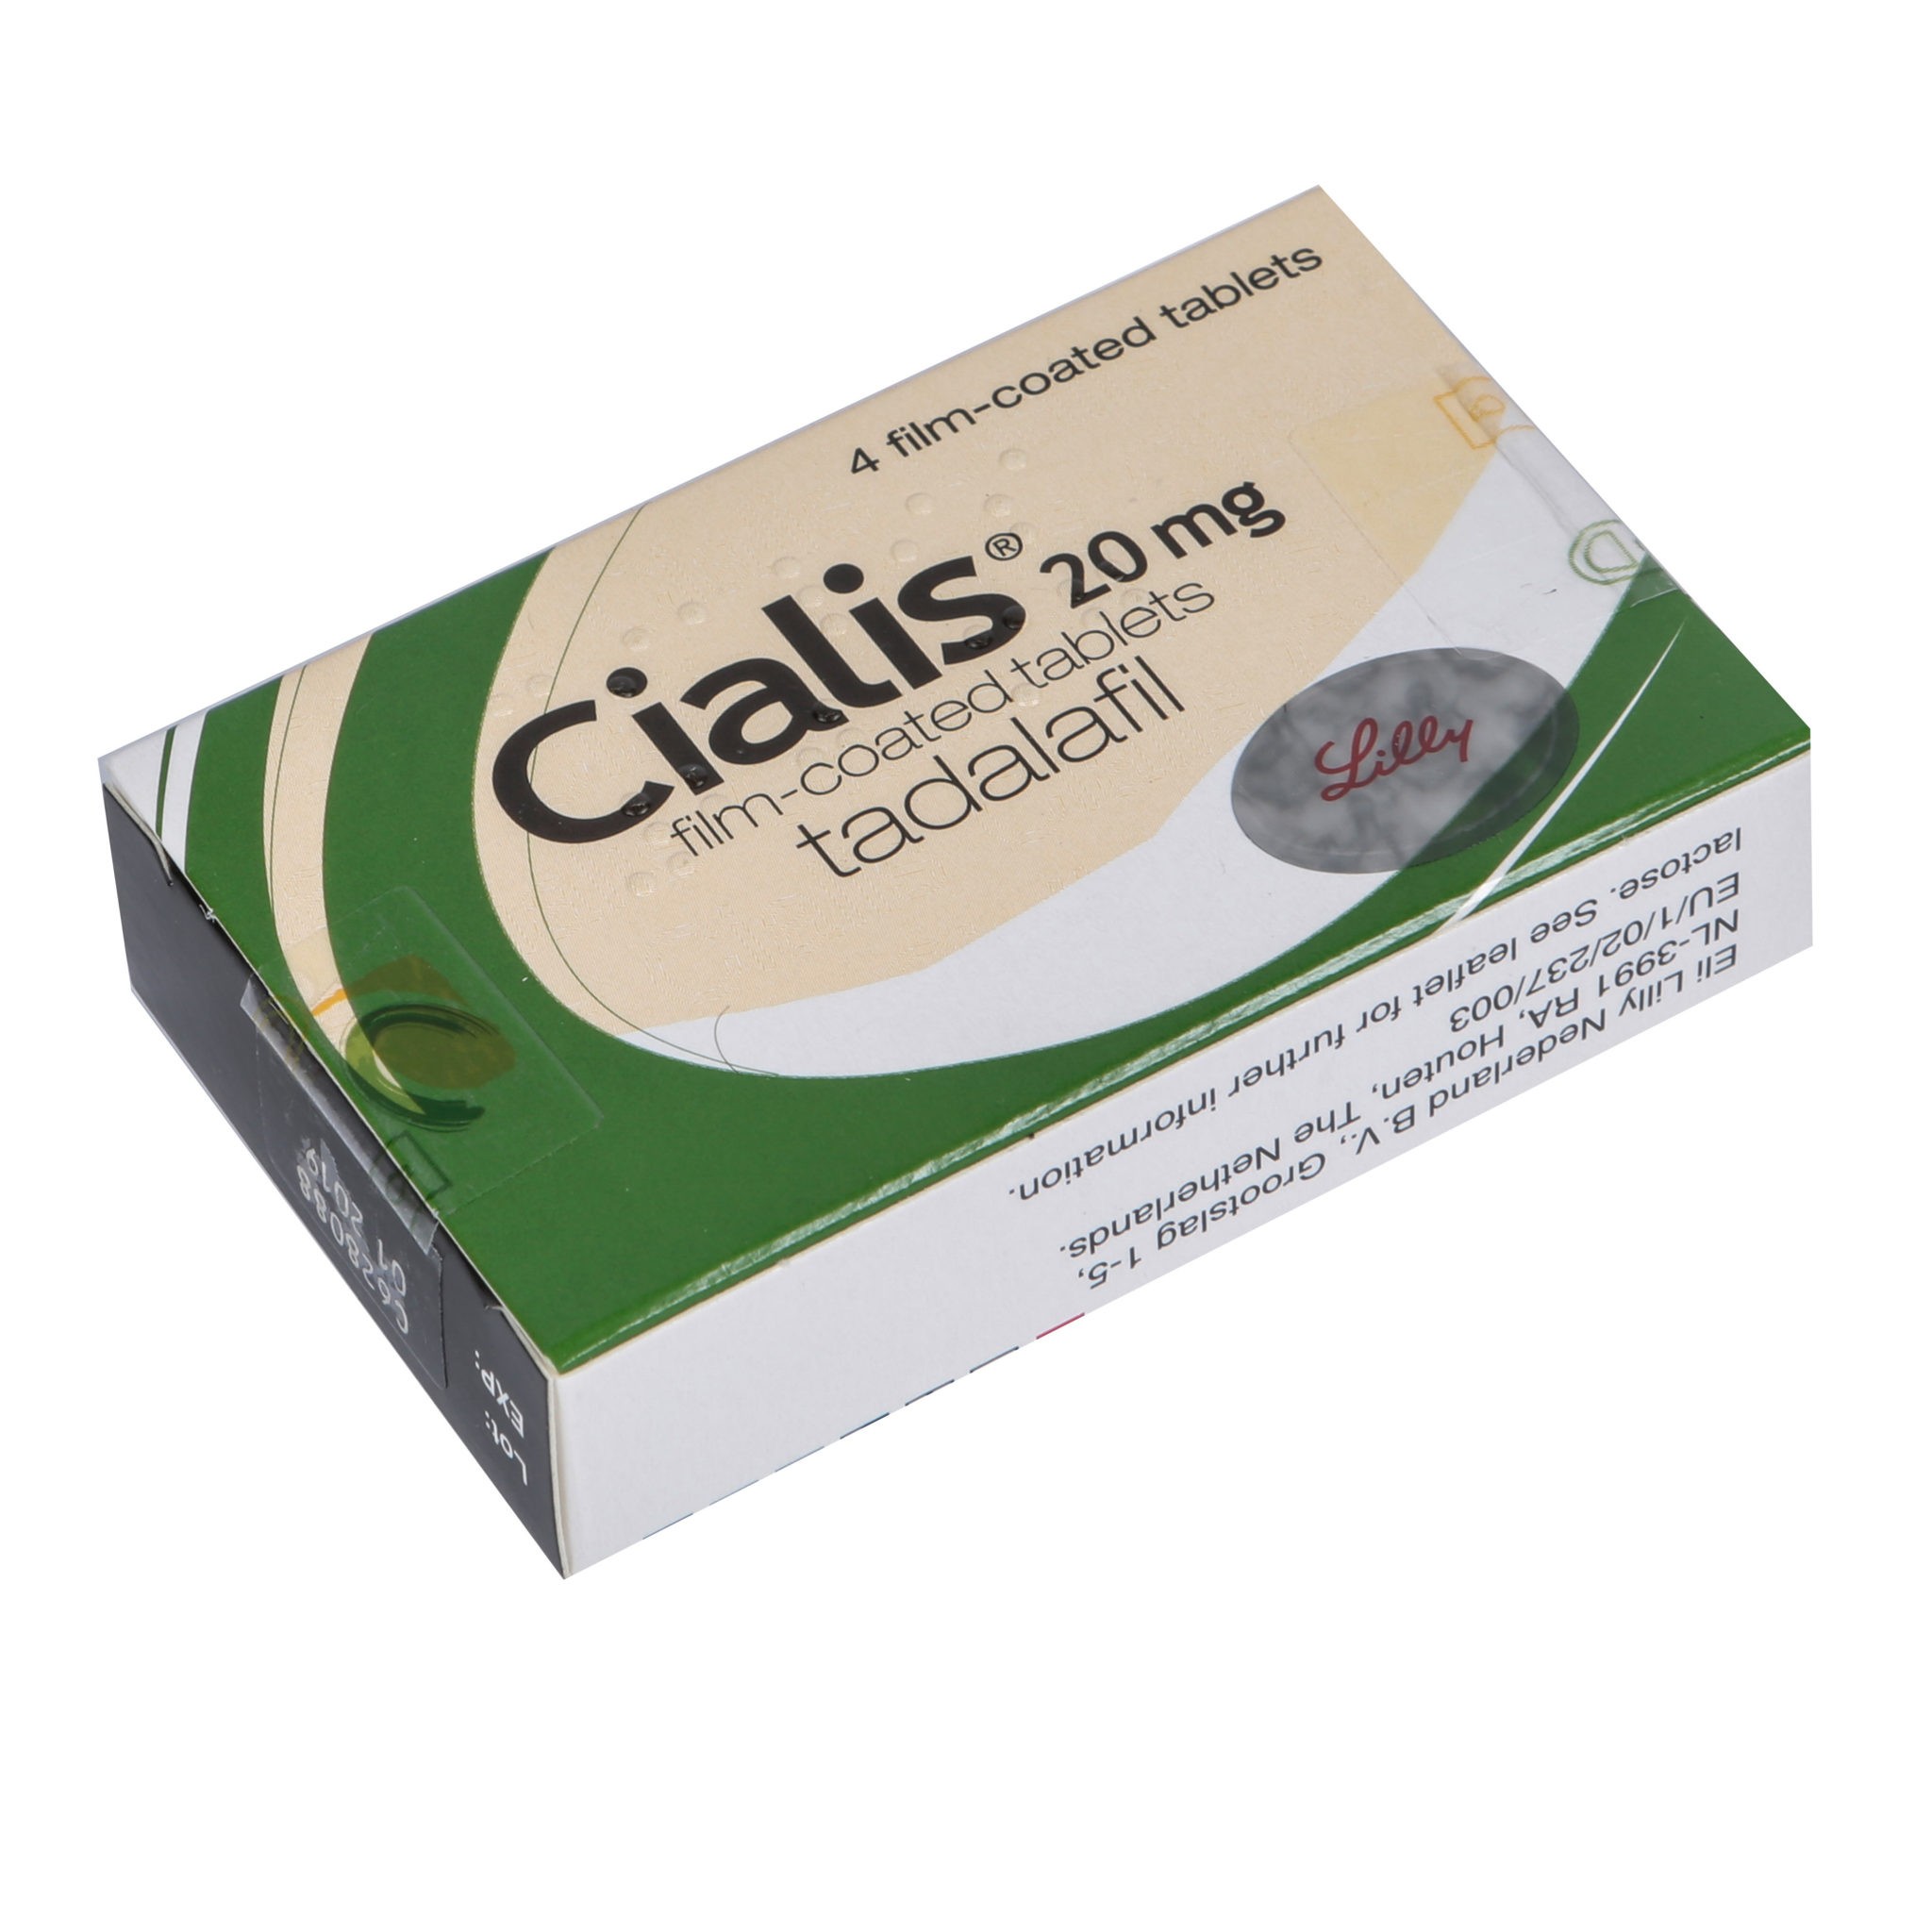 Cialis 20mg Tablets (16 Tablets)